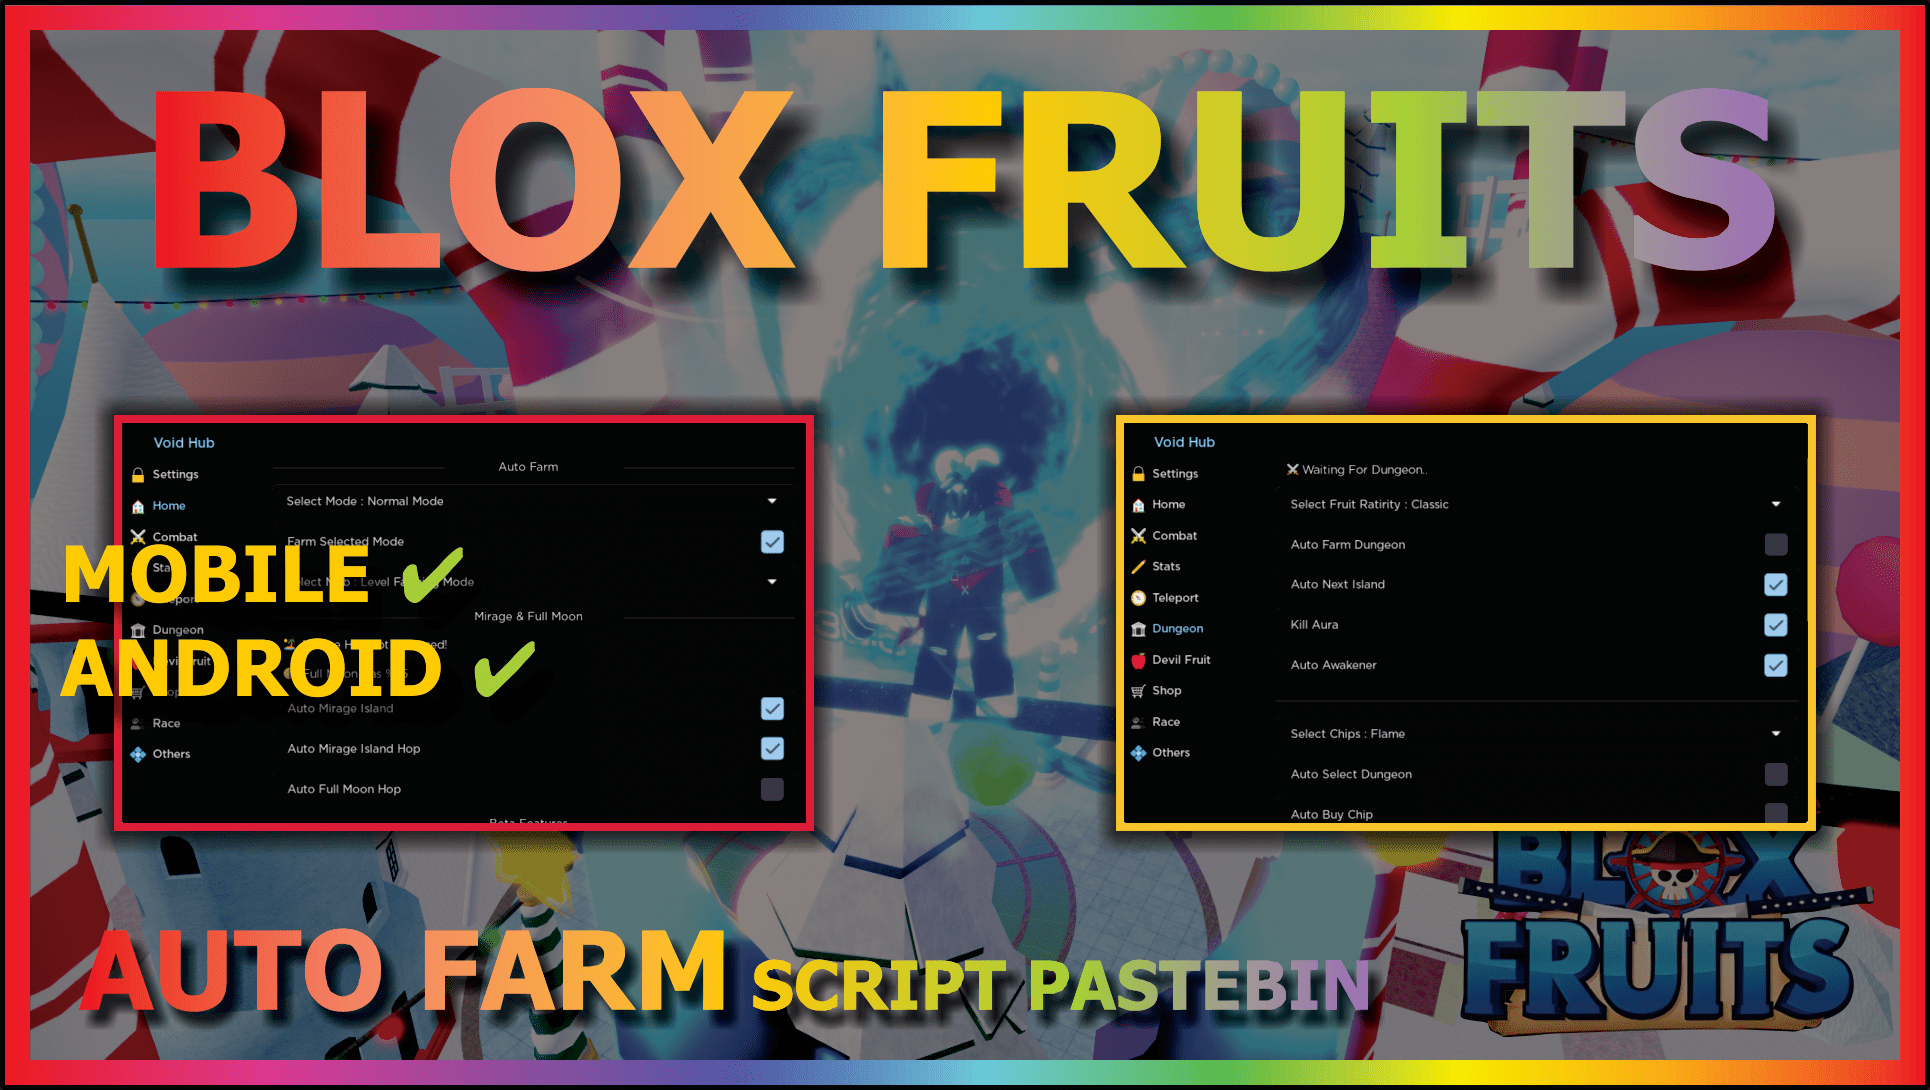 You are currently viewing BLOX FRUITS (VOID)